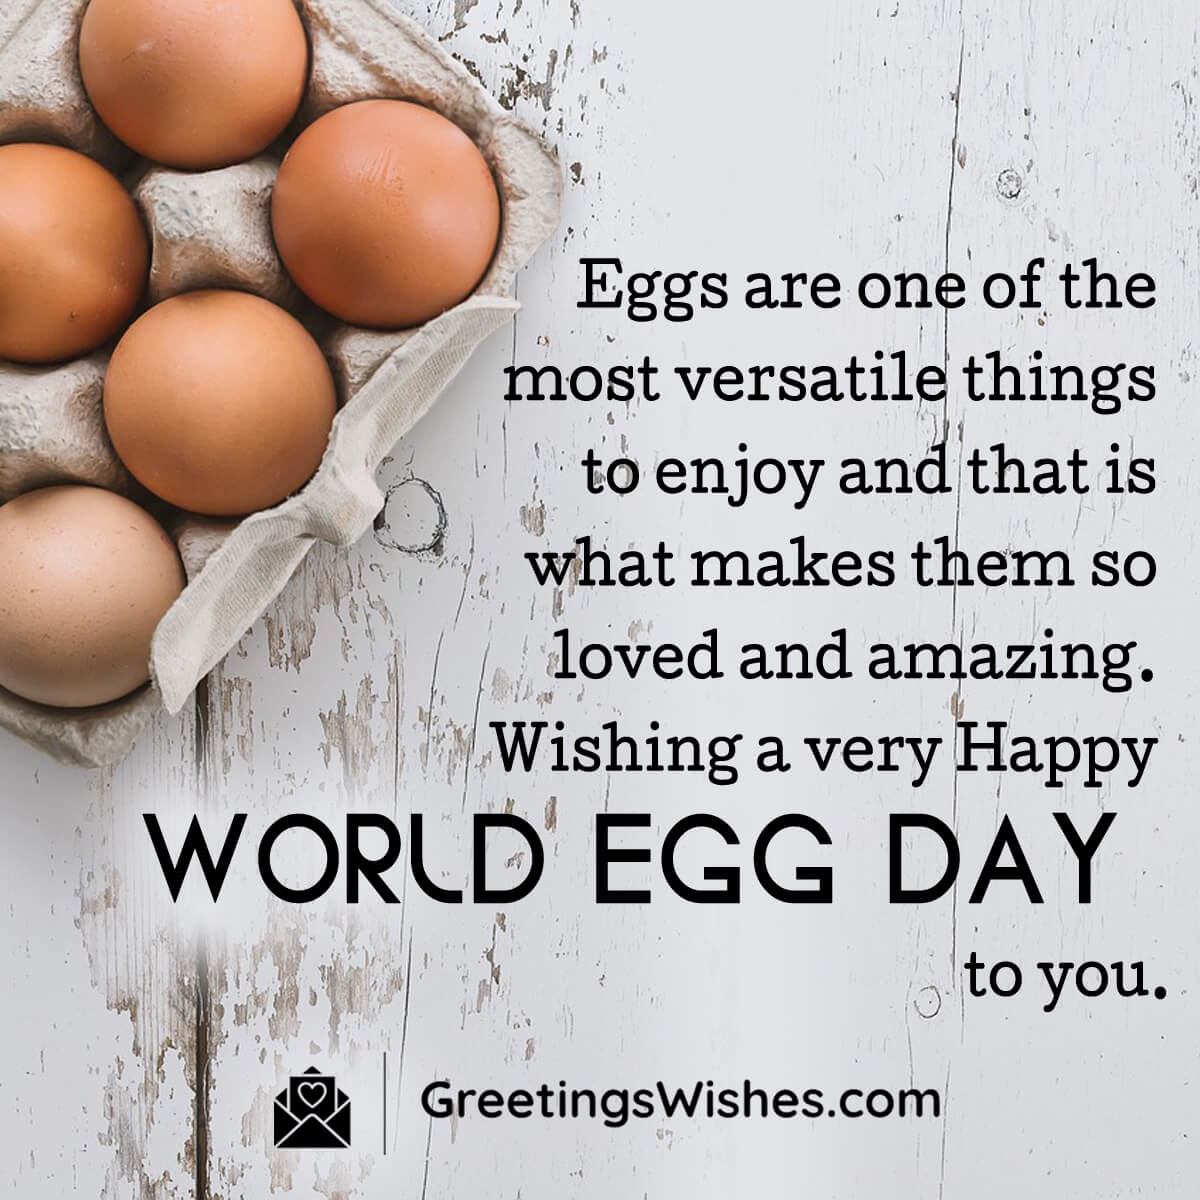 World Egg Day Wishes